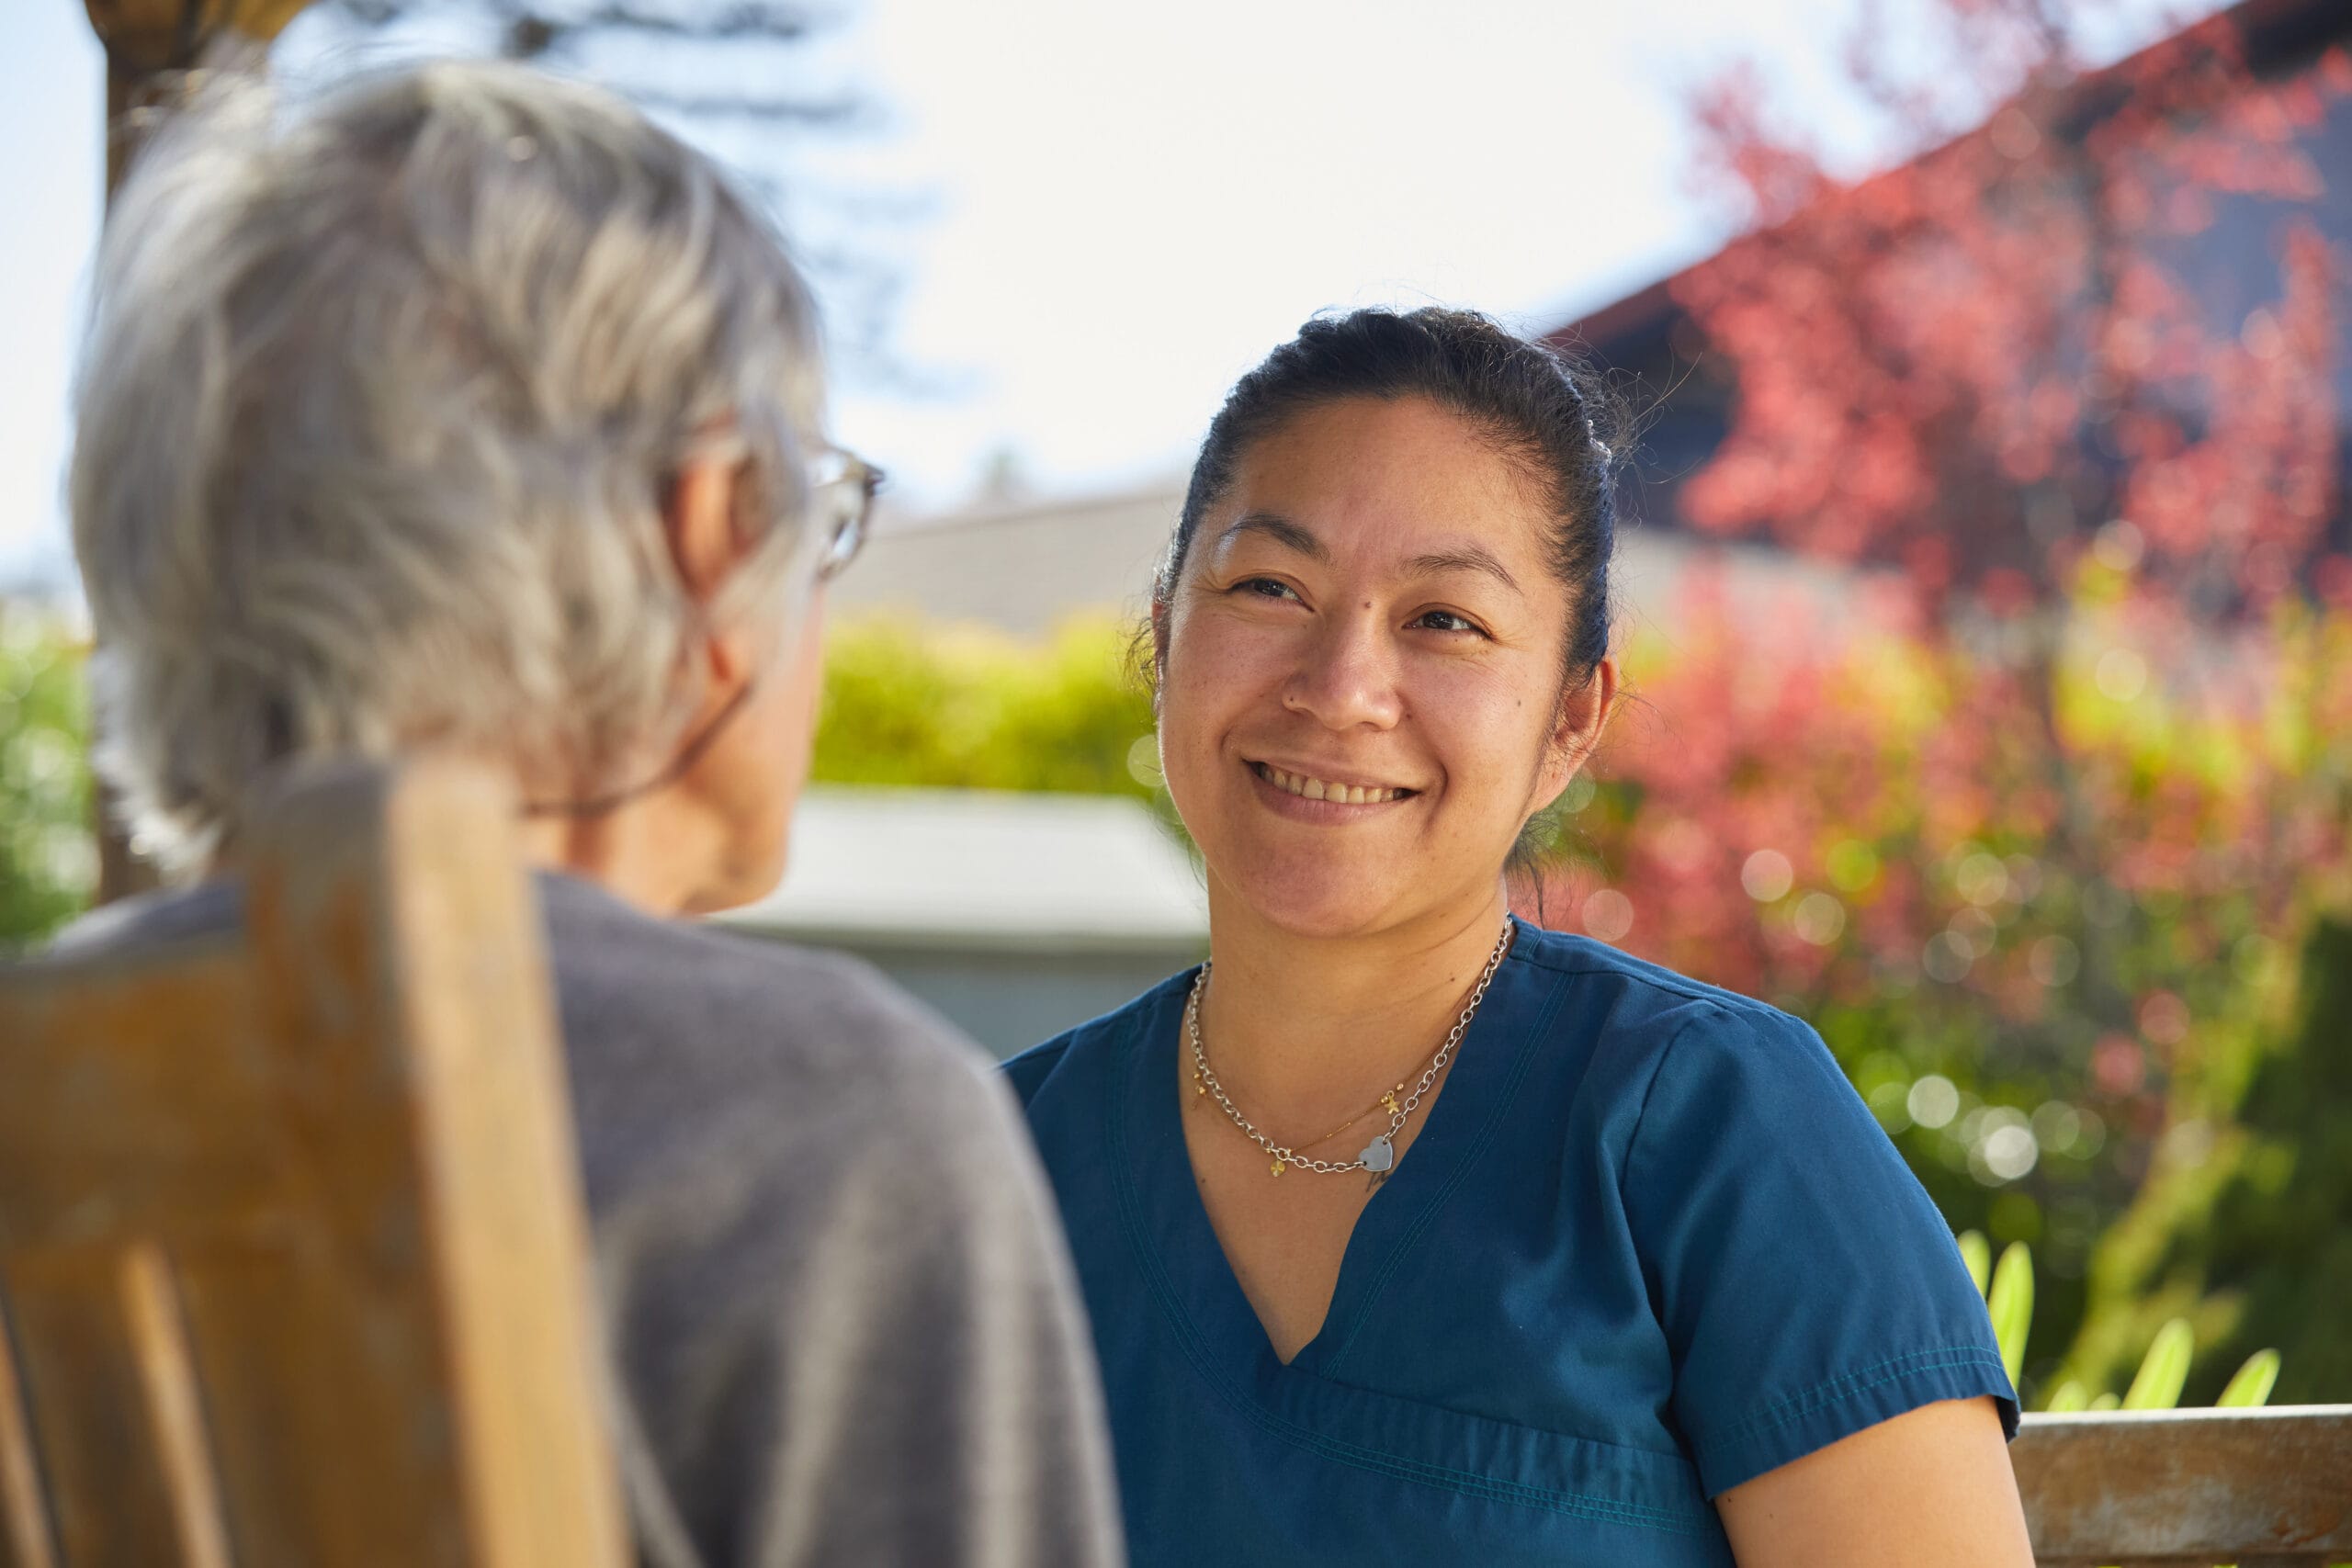 Skilled Nursing, nurse smiling at resident, outdoors in a community garden